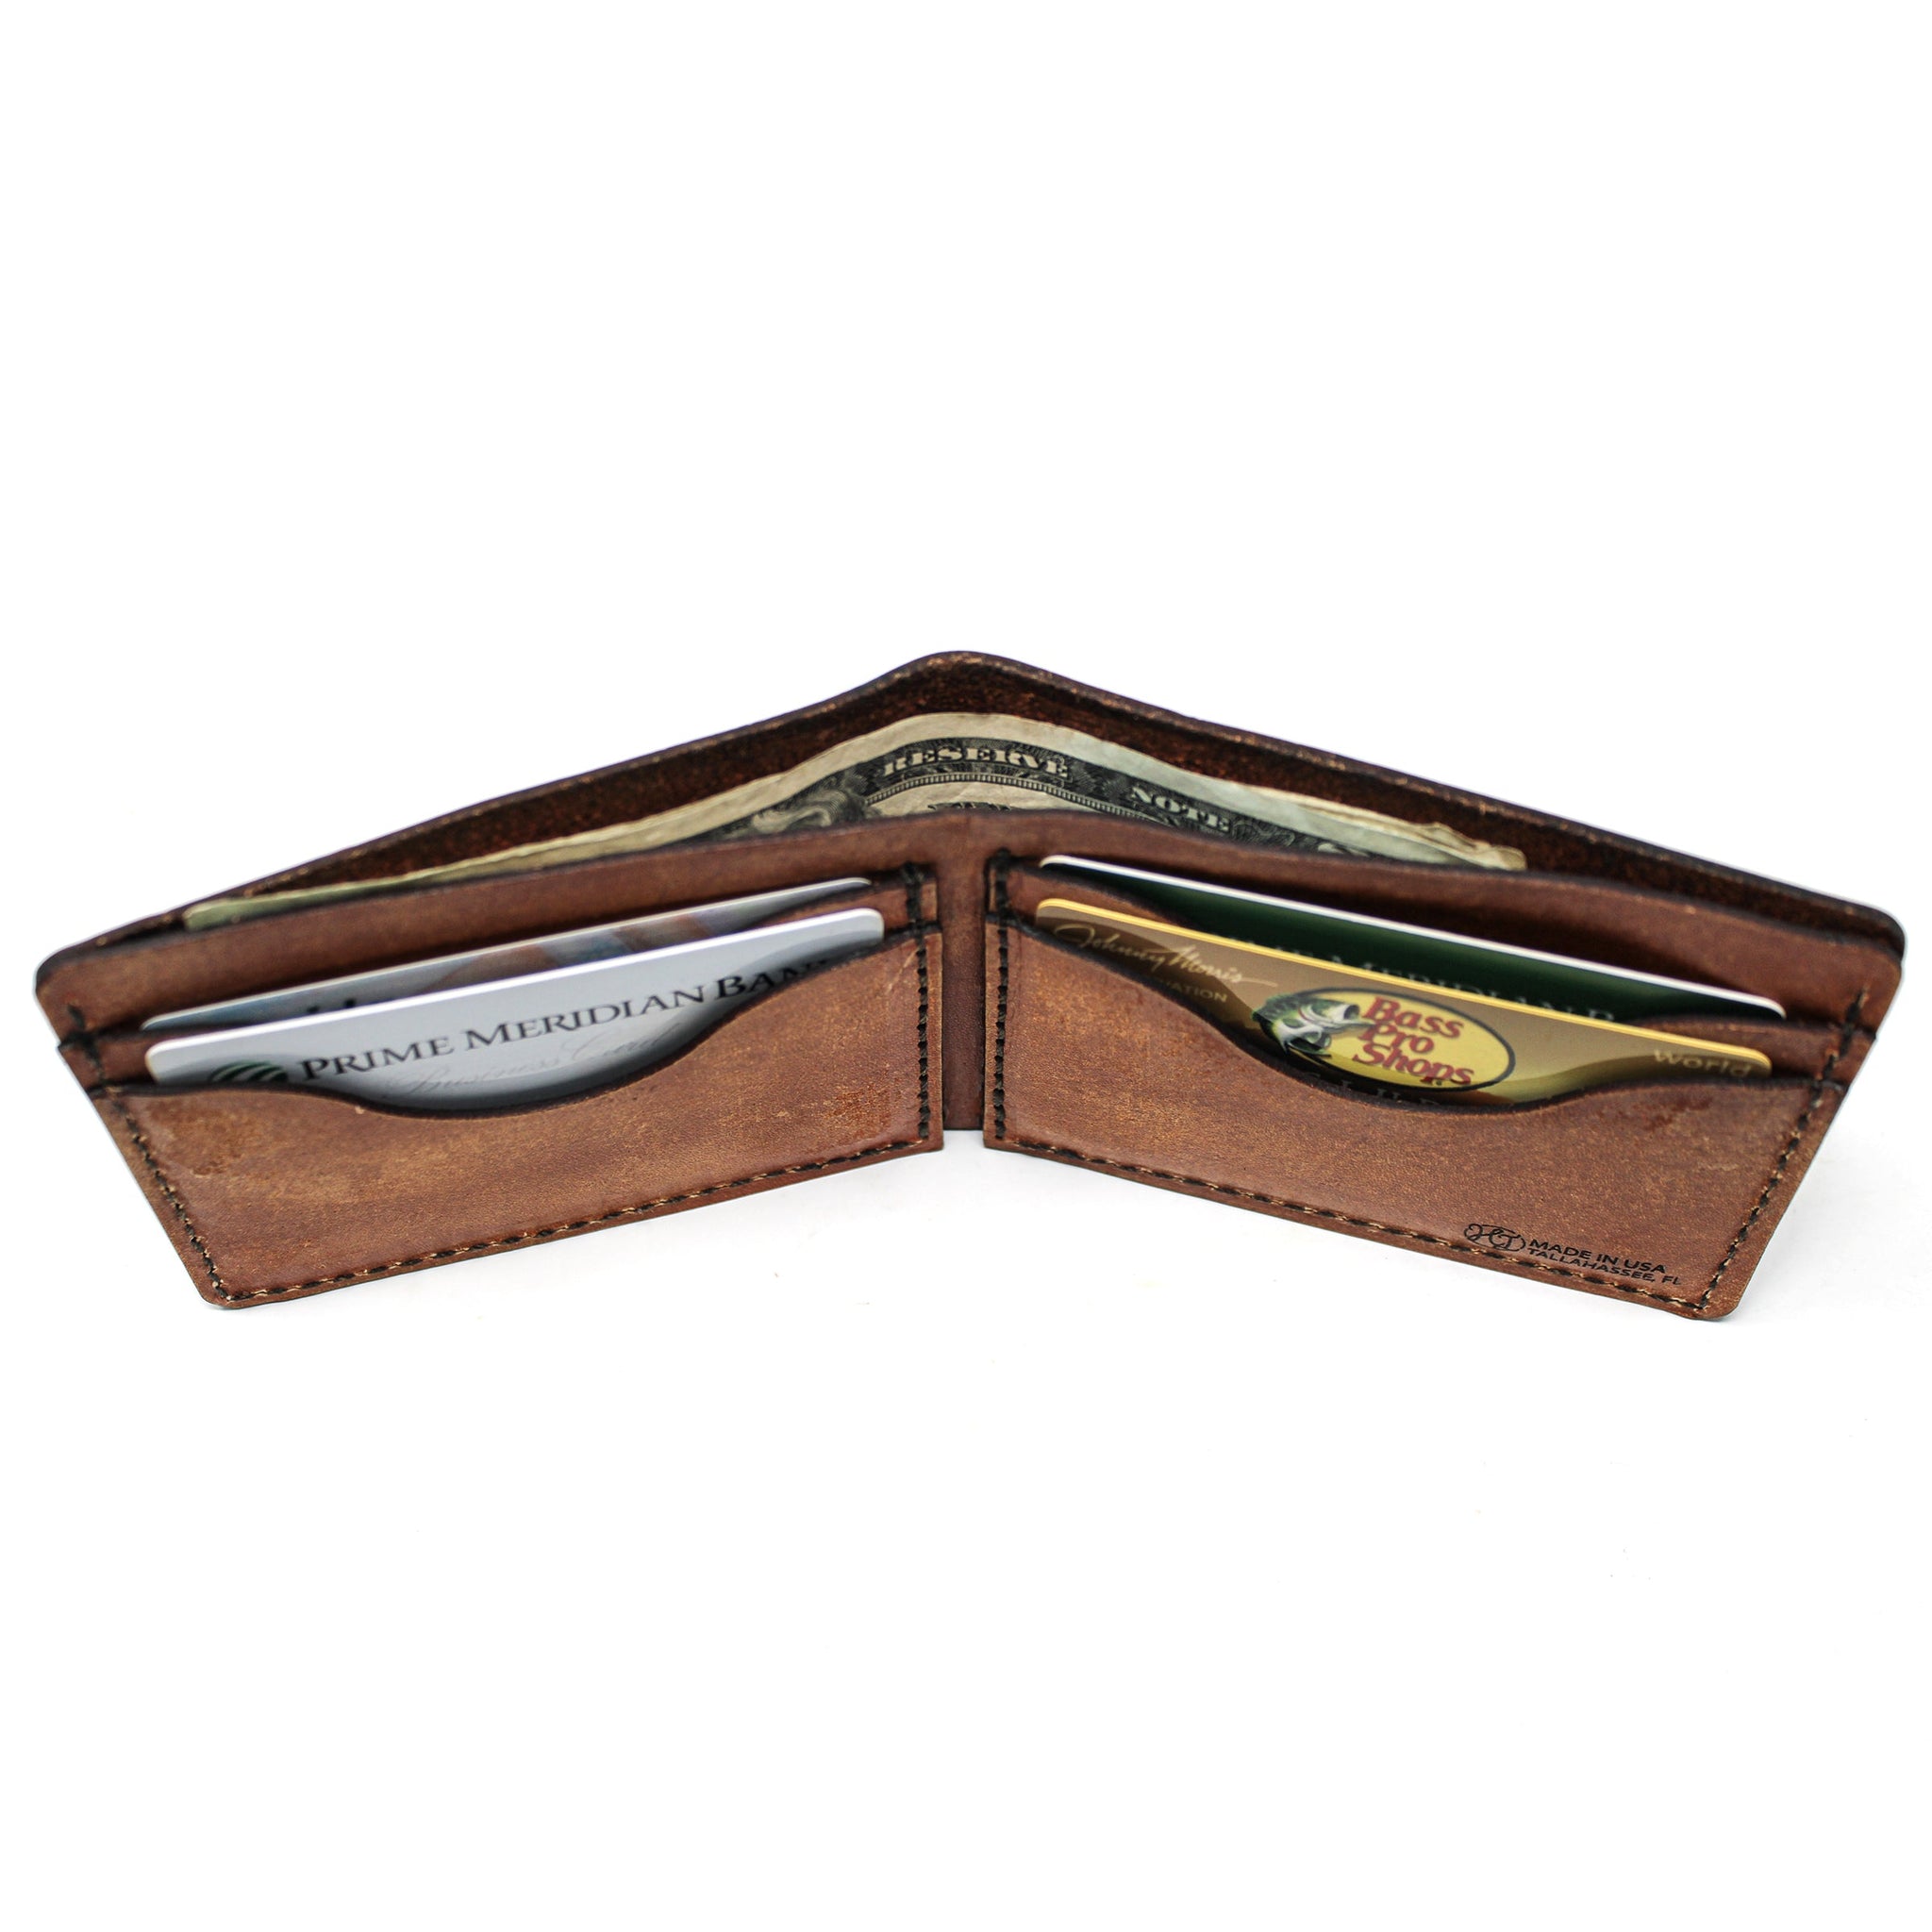 Leather Bill Fold Wallet -  Large Mouth Bass